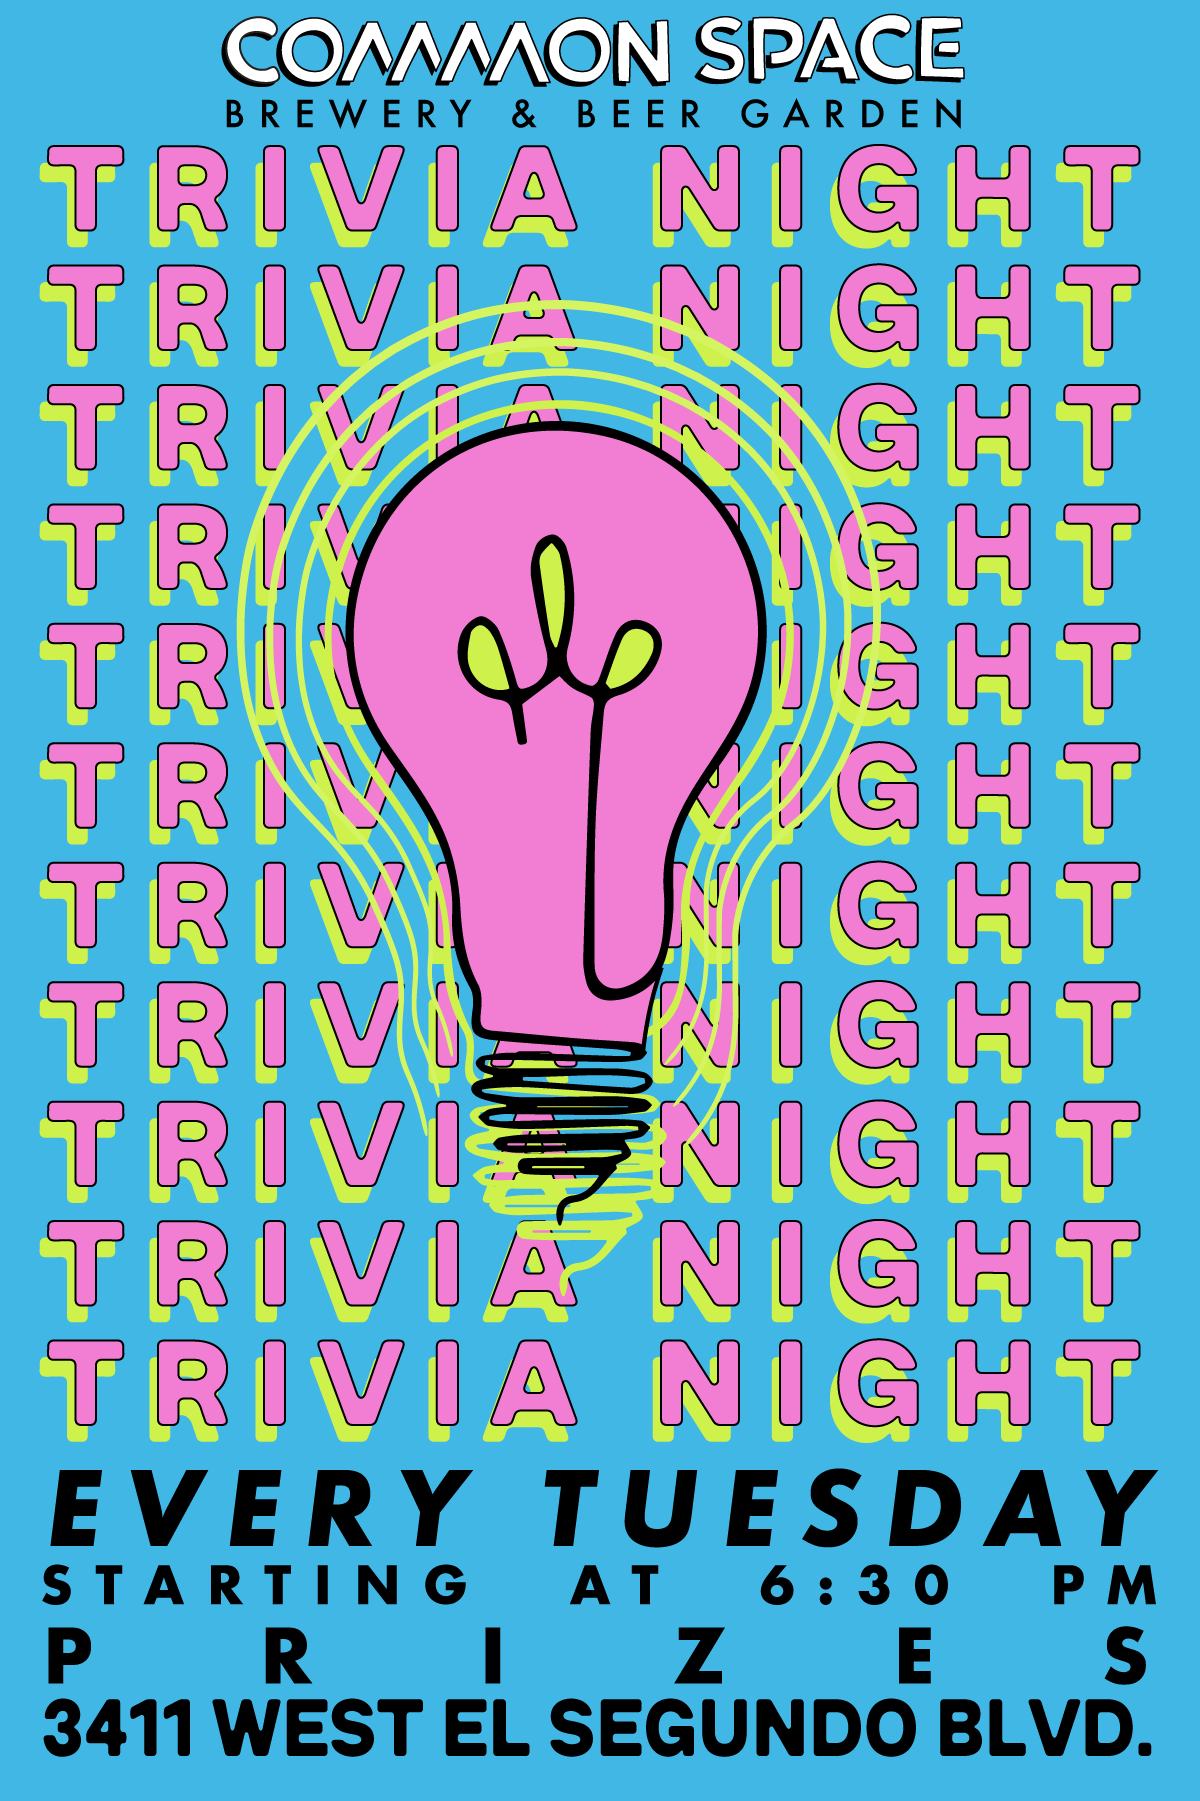 Trivia Night at Common Space!